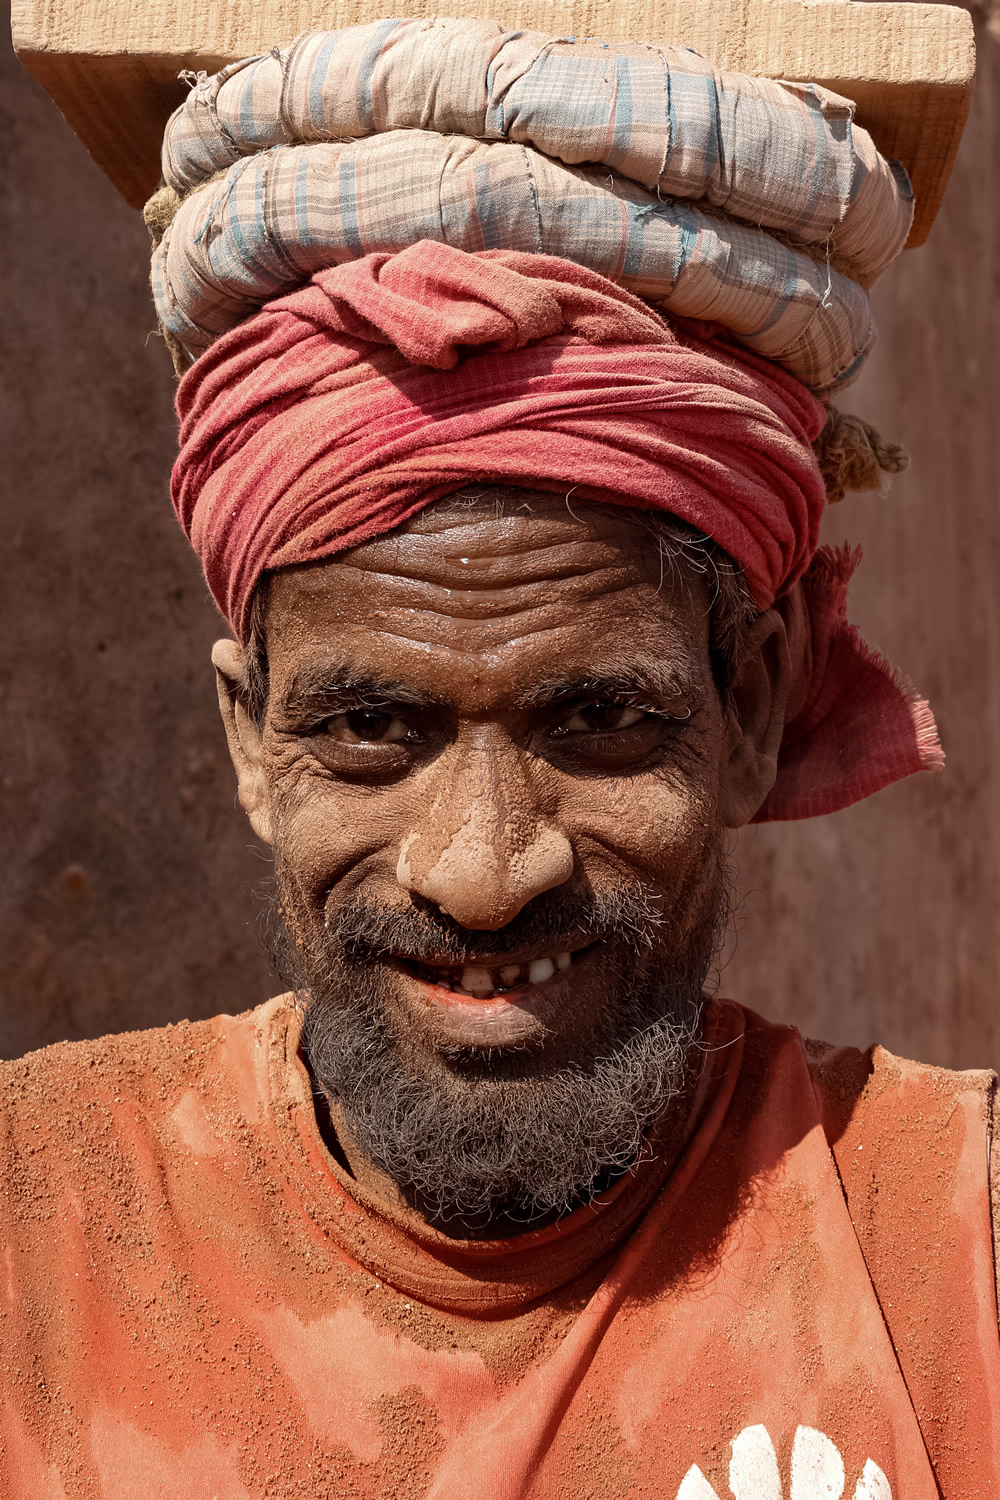 Life Of Brick Kiln Workers: Photo Series by Sumon Das